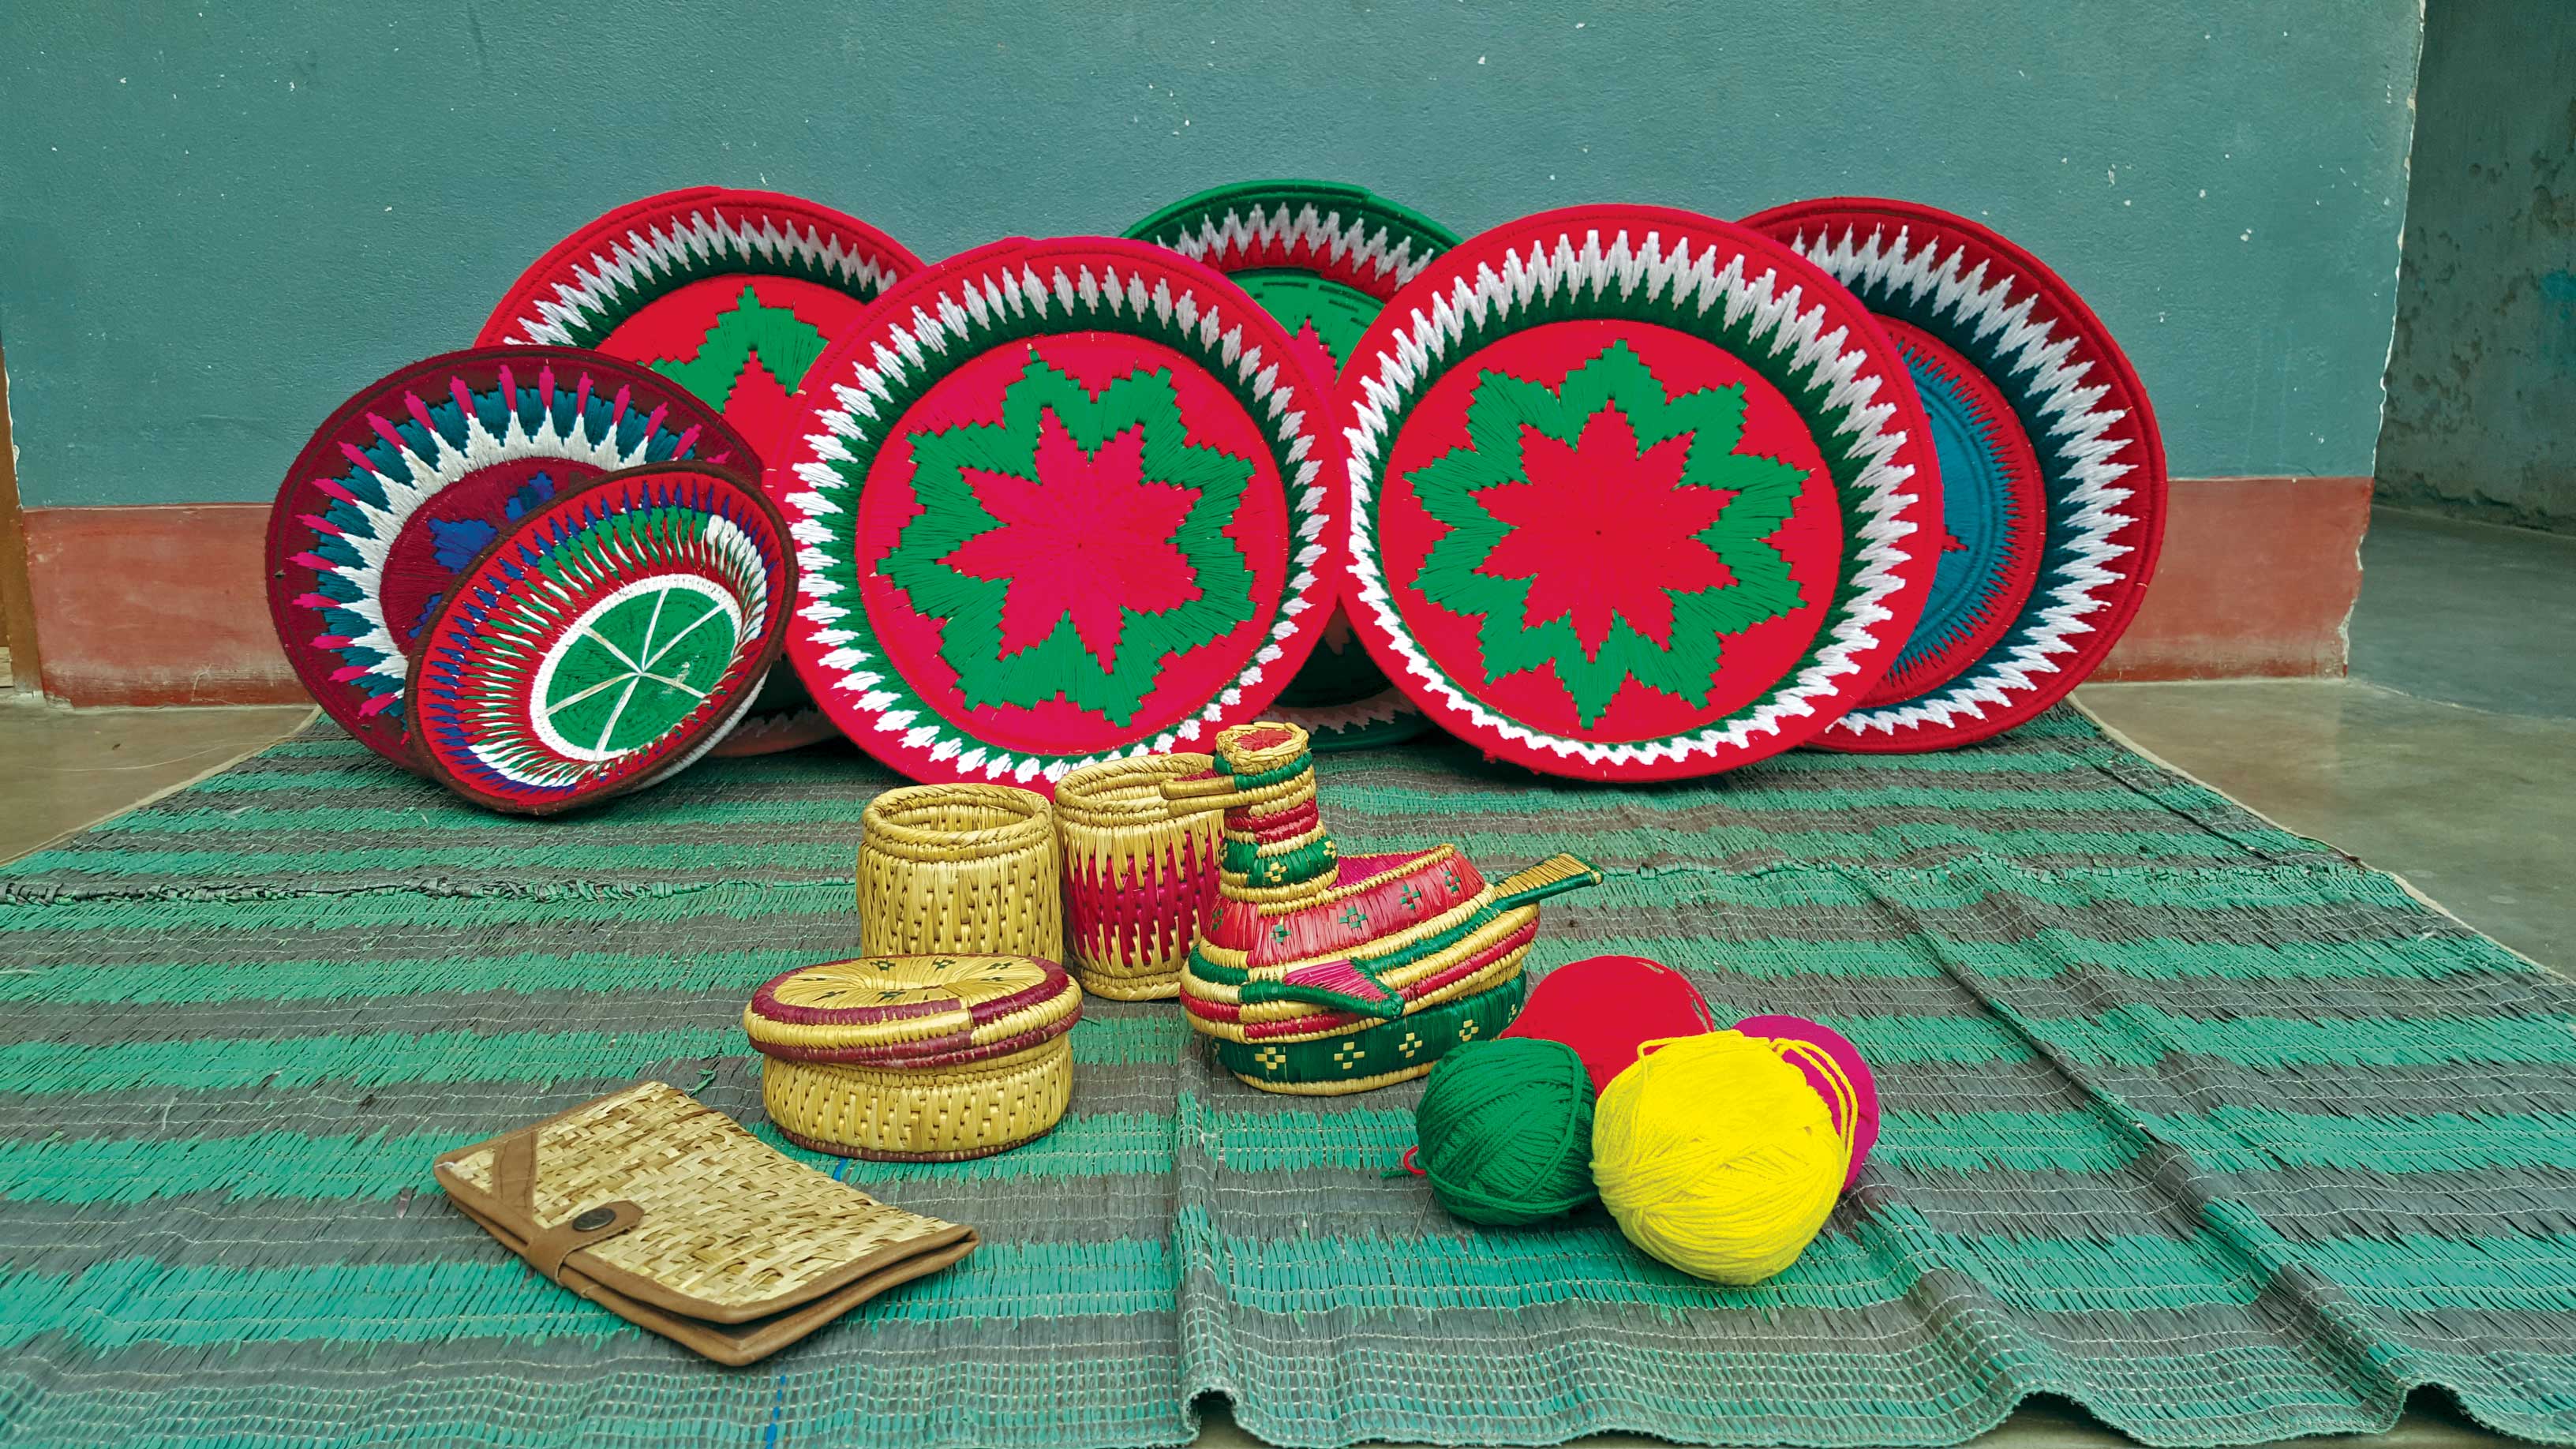 The art of weaving beautiful baskets from sikki and kans grass